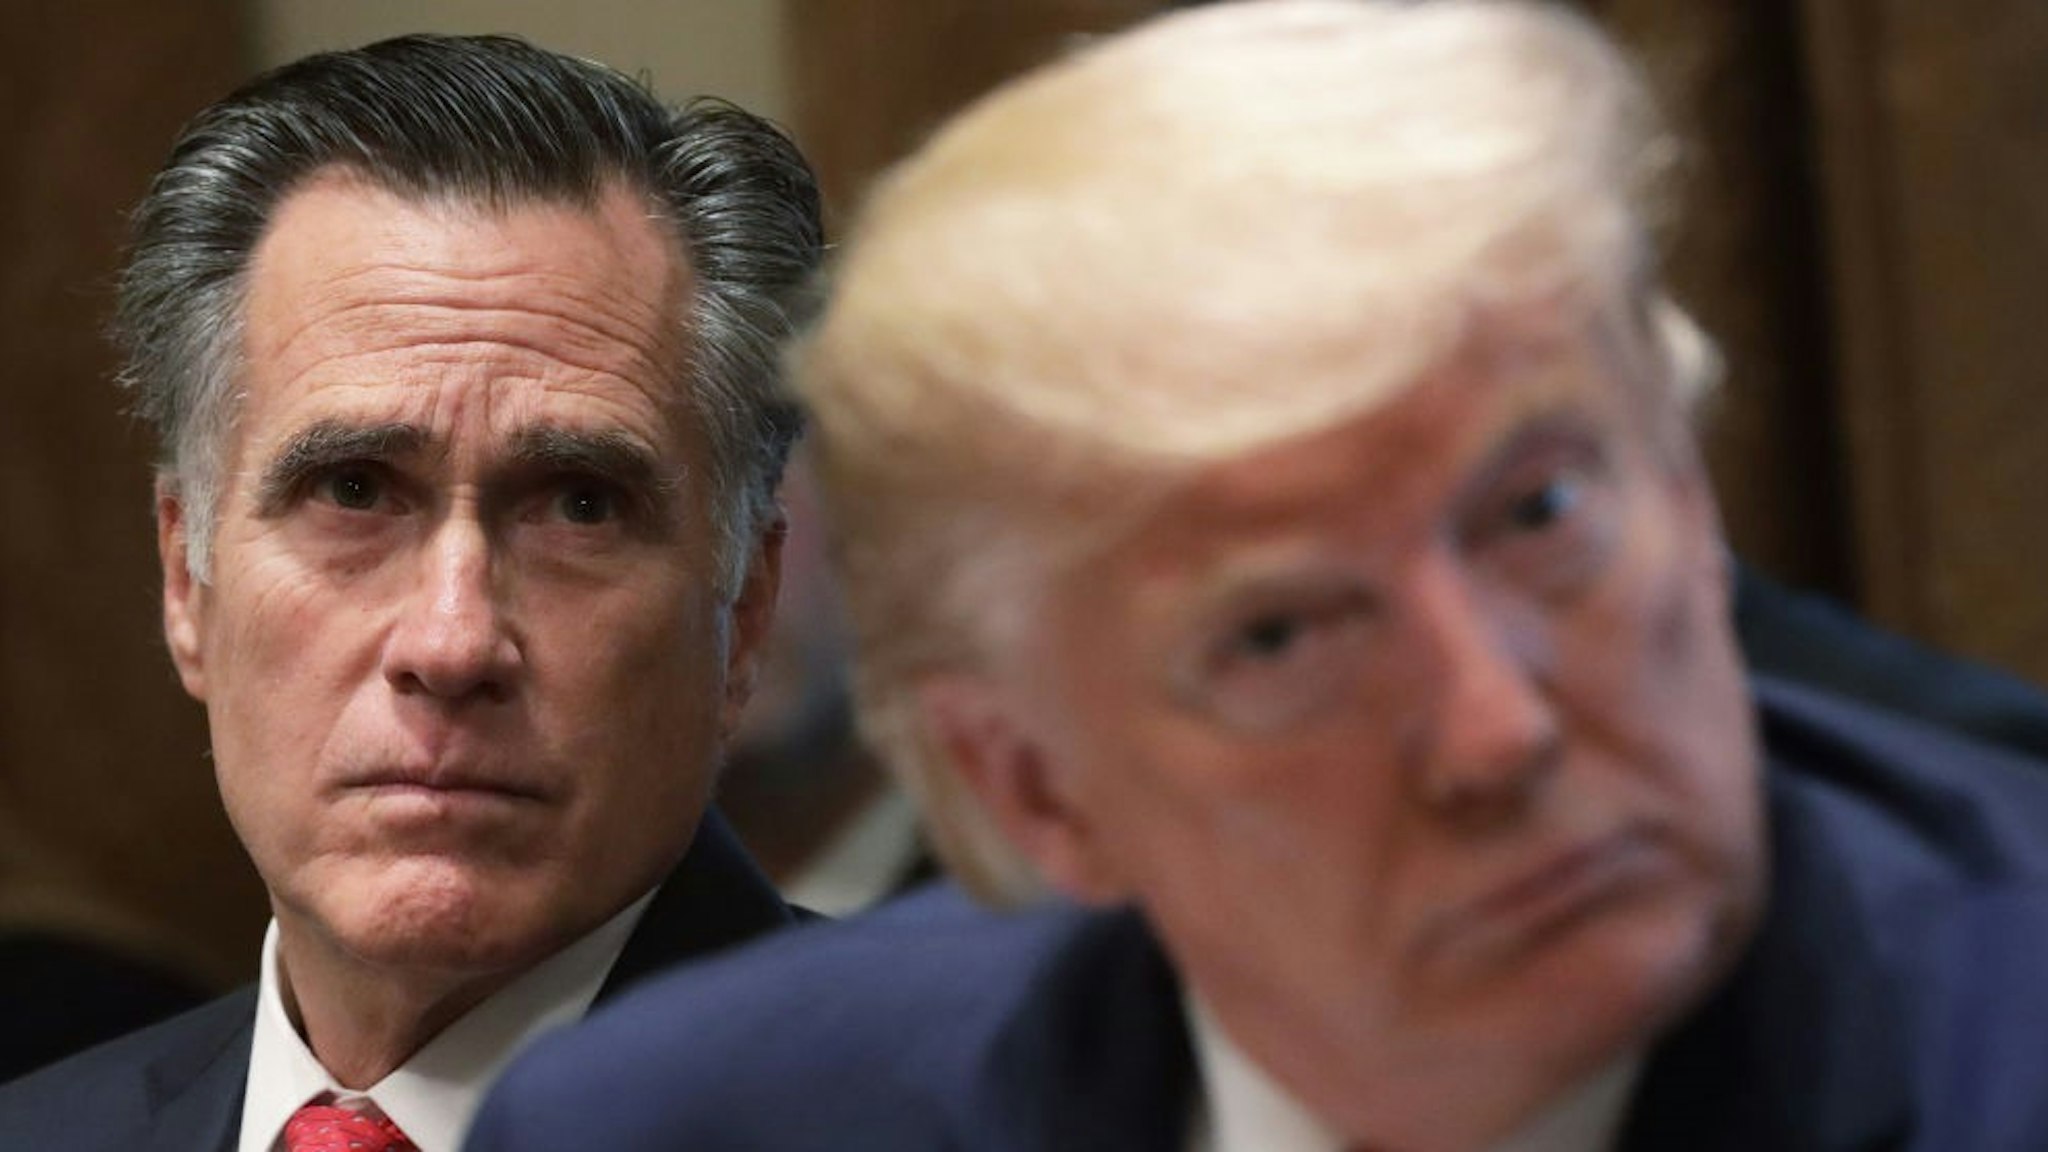 WASHINGTON, DC - NOVEMBER 22: U.S. Sen. Mitt Romney (R-UT) and President Donald Trump listen during a listening session on youth vaping of electronic cigarette on November 22, 2019 in the Cabinet Room of the White House in Washington, DC. President Trump met with business and concern group leaders to discuss on how to regulate vaping products and keep youth away from them. (Photo by